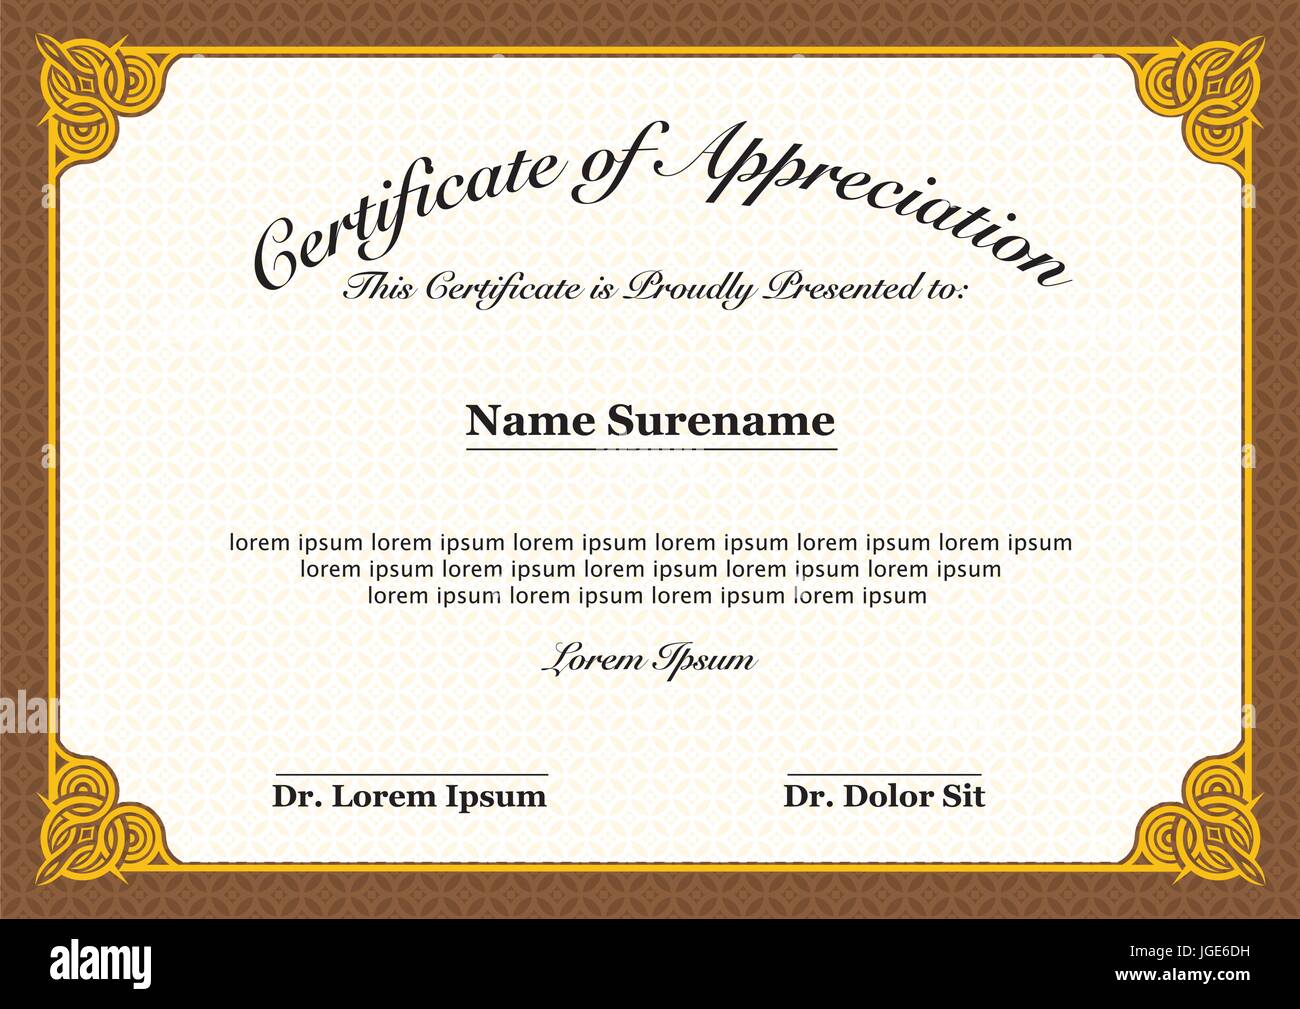 Certificate of Appreciation Ready for Print also blank space provide Stock Vector